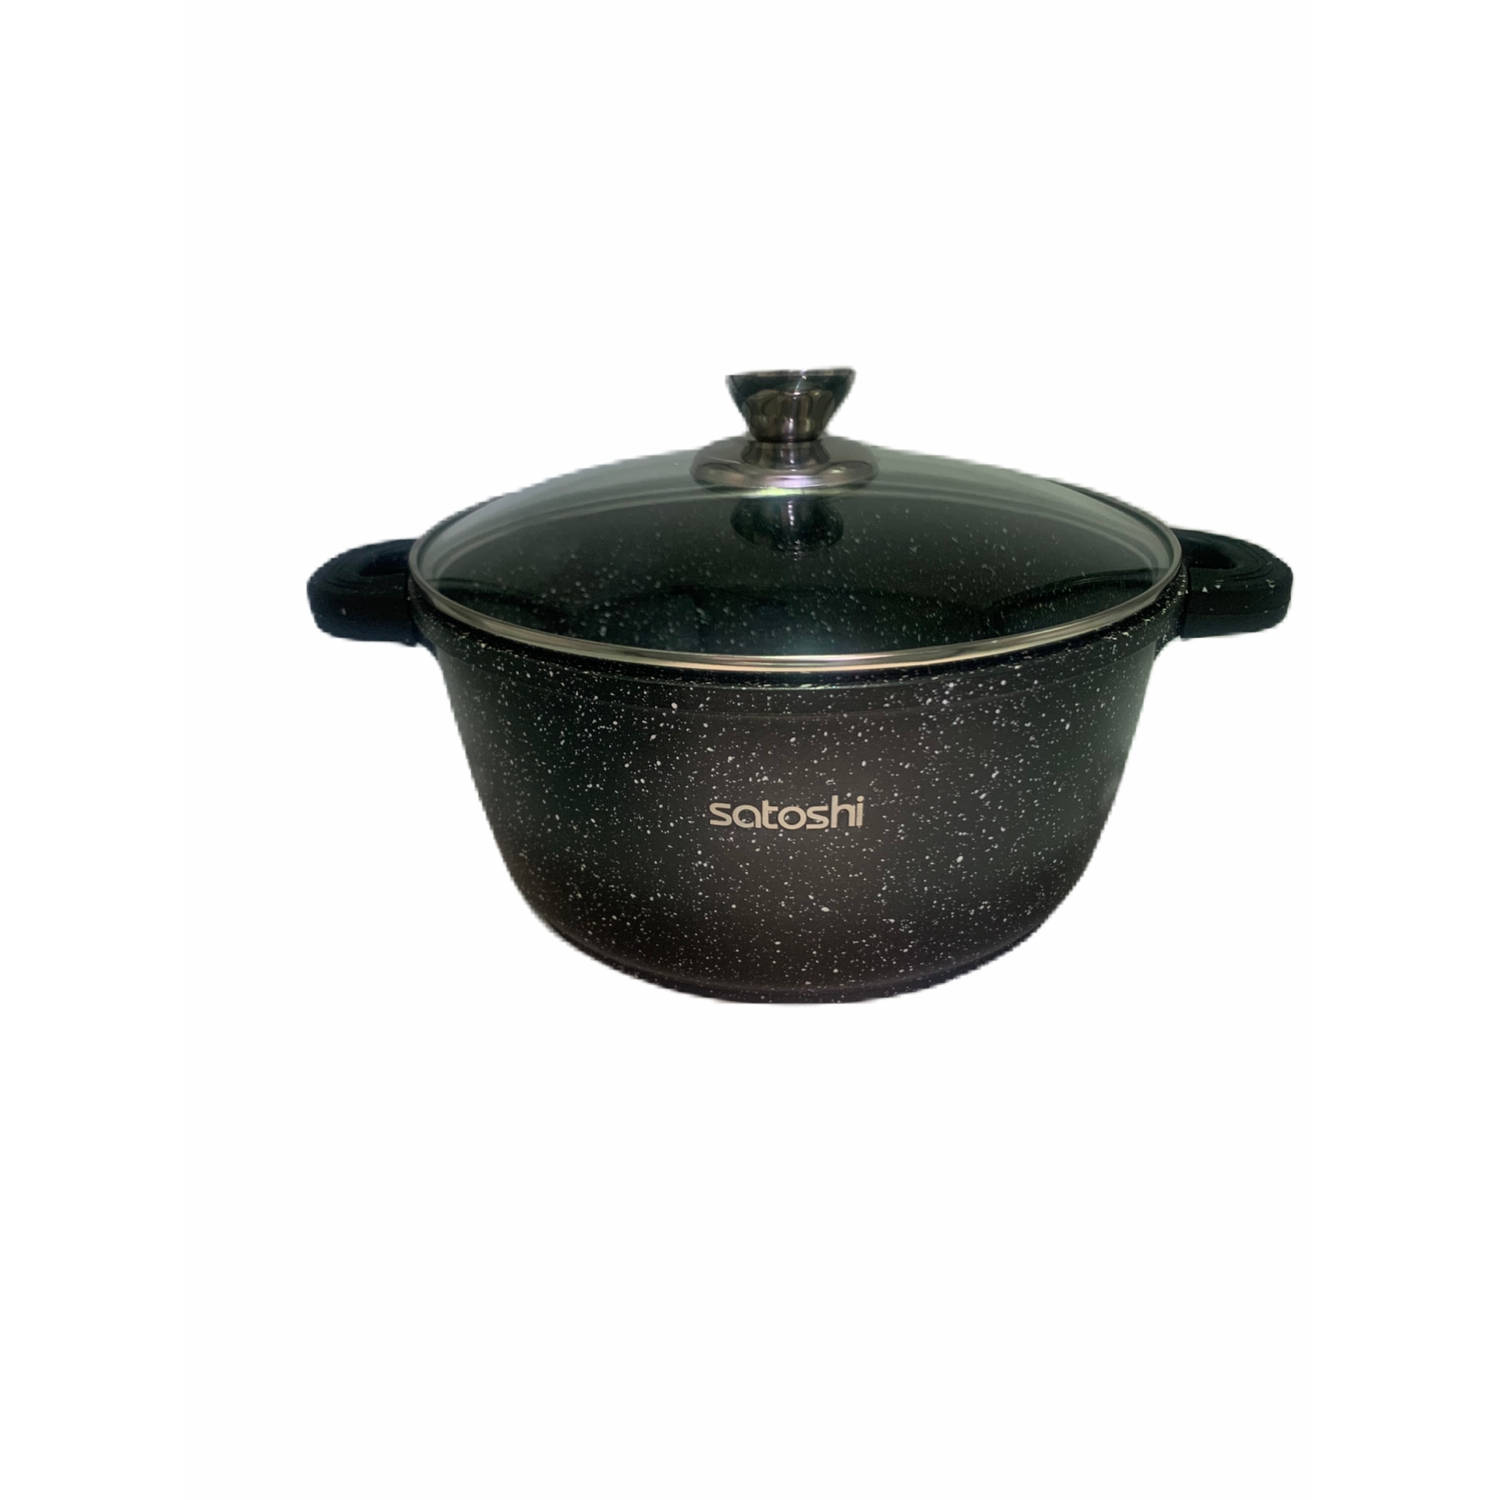 Satoshi Limoges Braadpan Ø24 CM - Marble coating - Afneembare Siliconen Cool-touch handgrepen - 4,2L